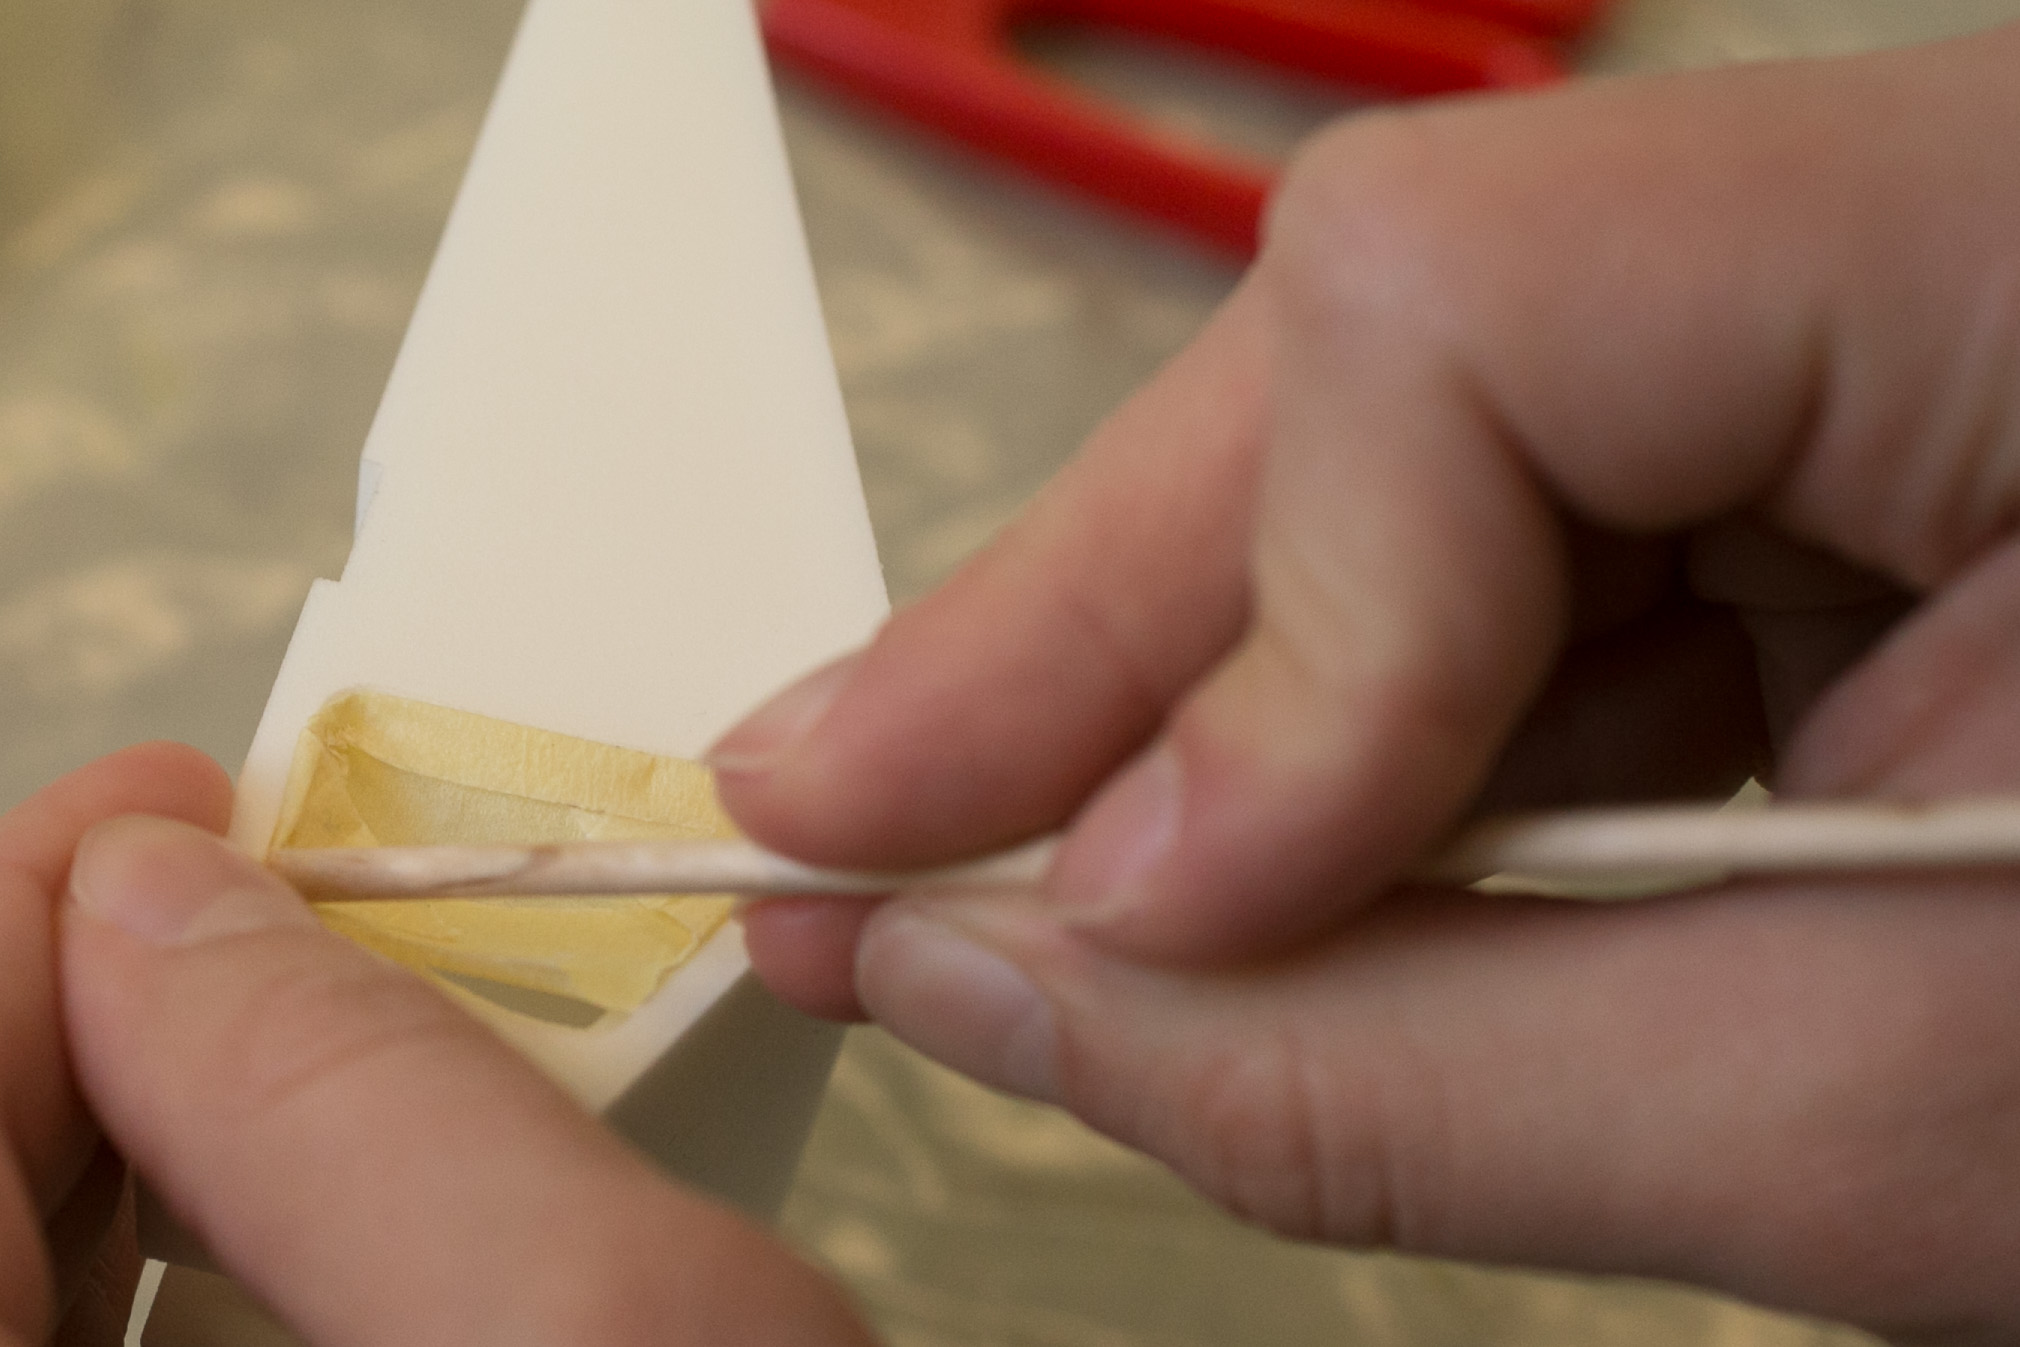 A pointy wooden stick helps when applying tape to tricky areas